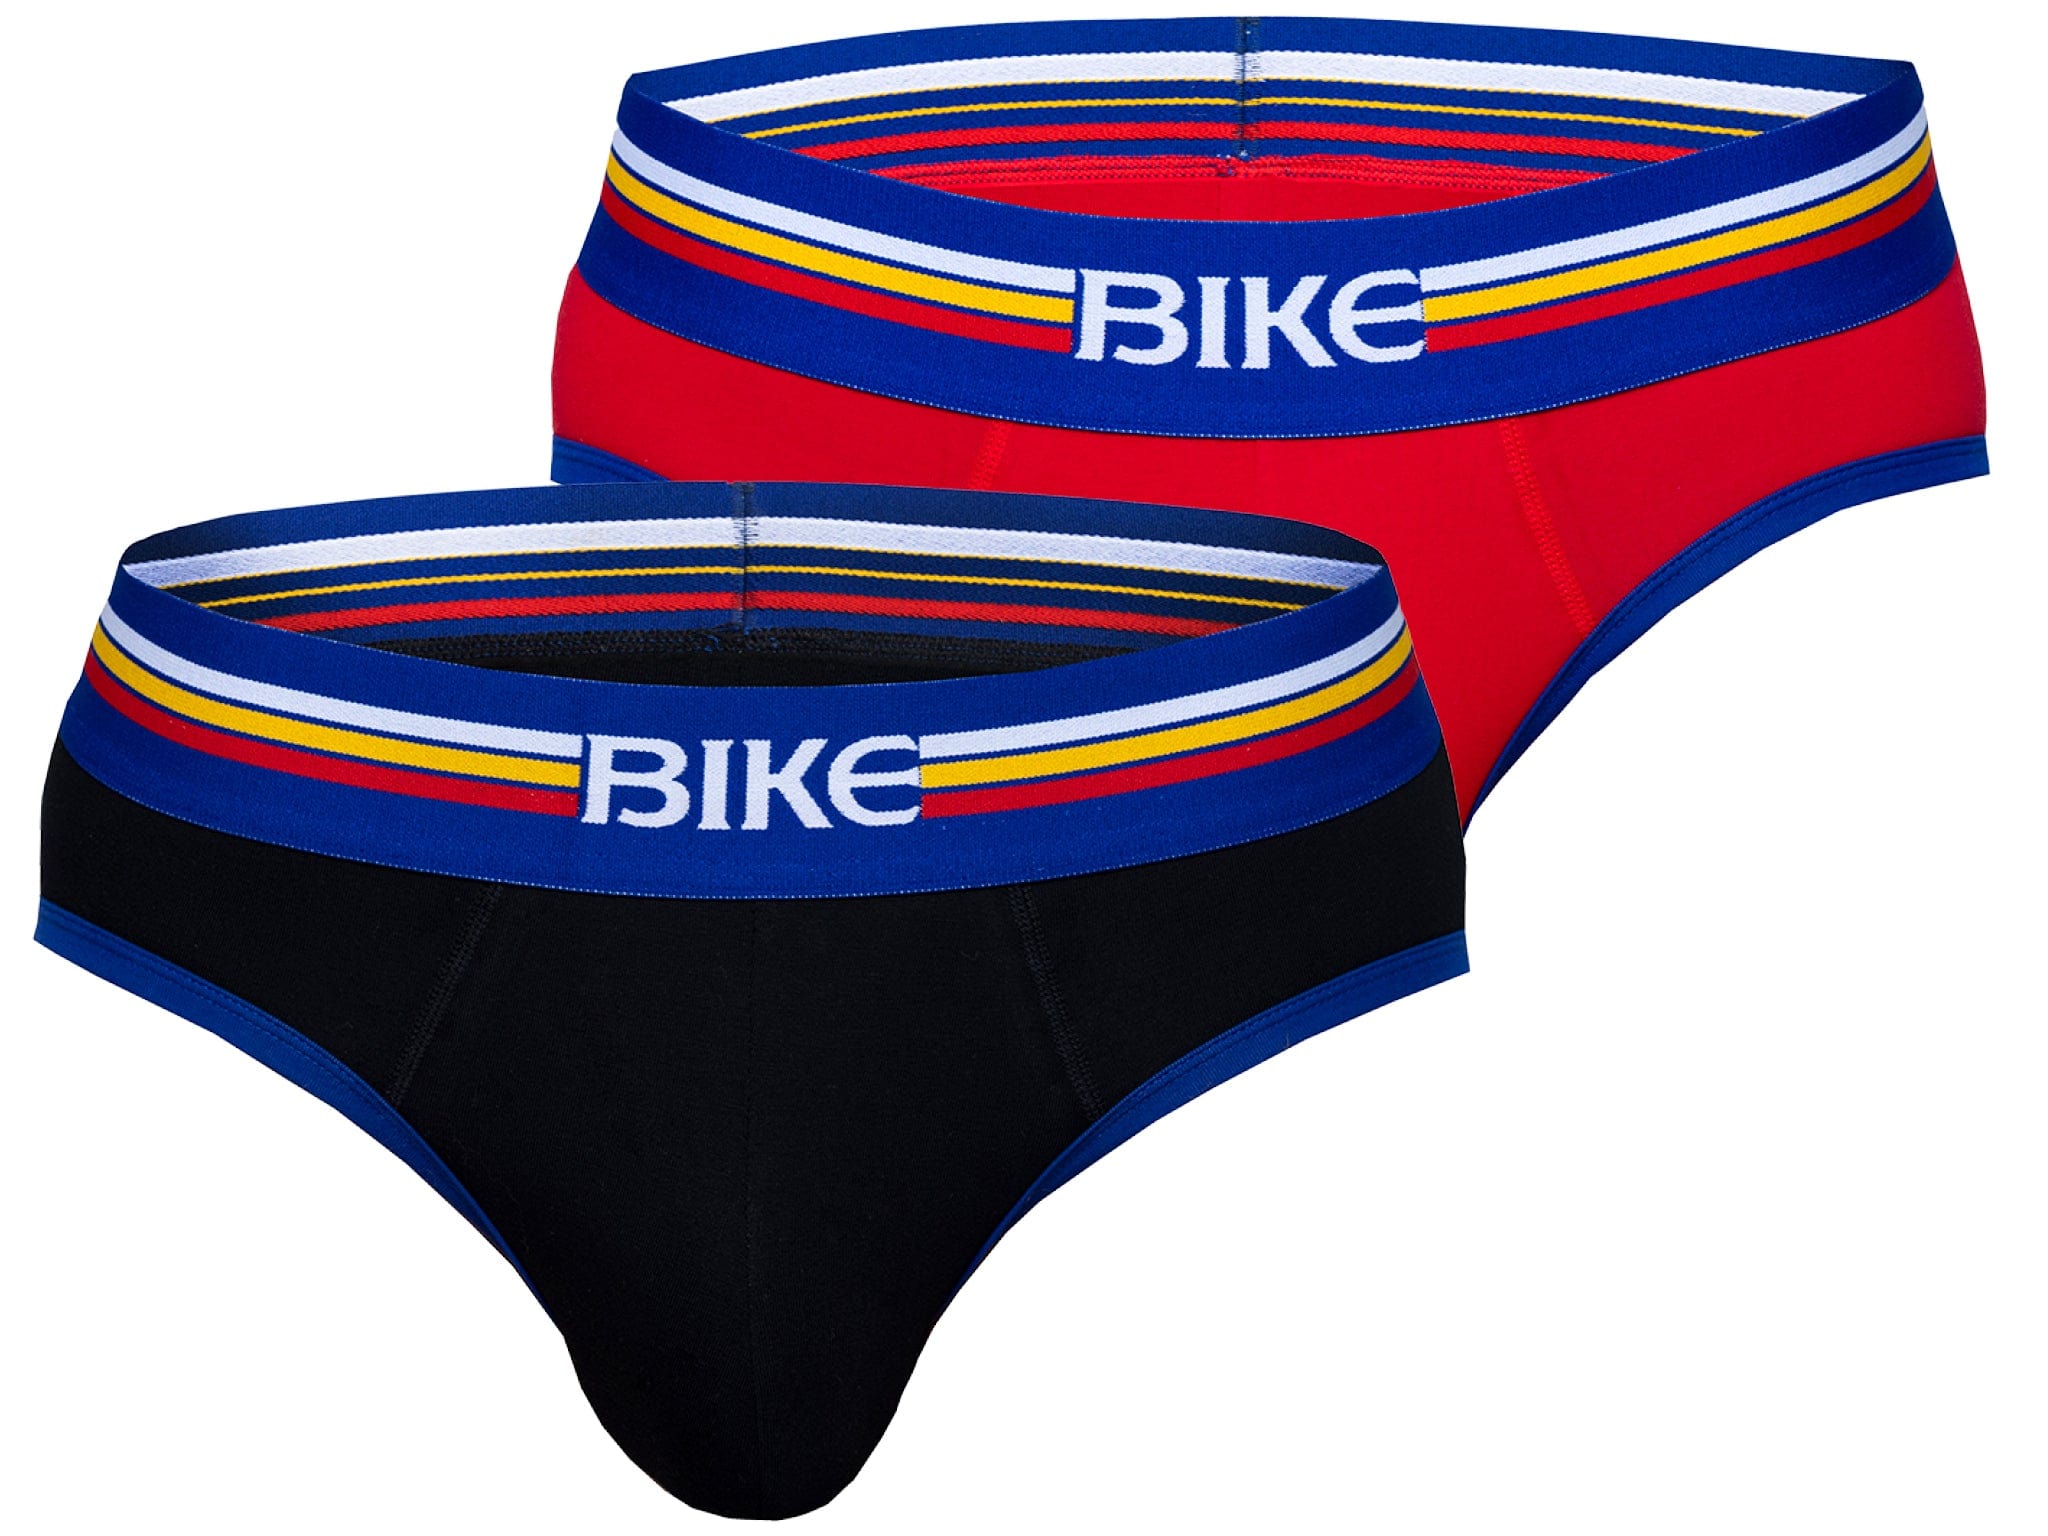 2 Pack Men's Briefs in Black and Red - BIKE® Athletic